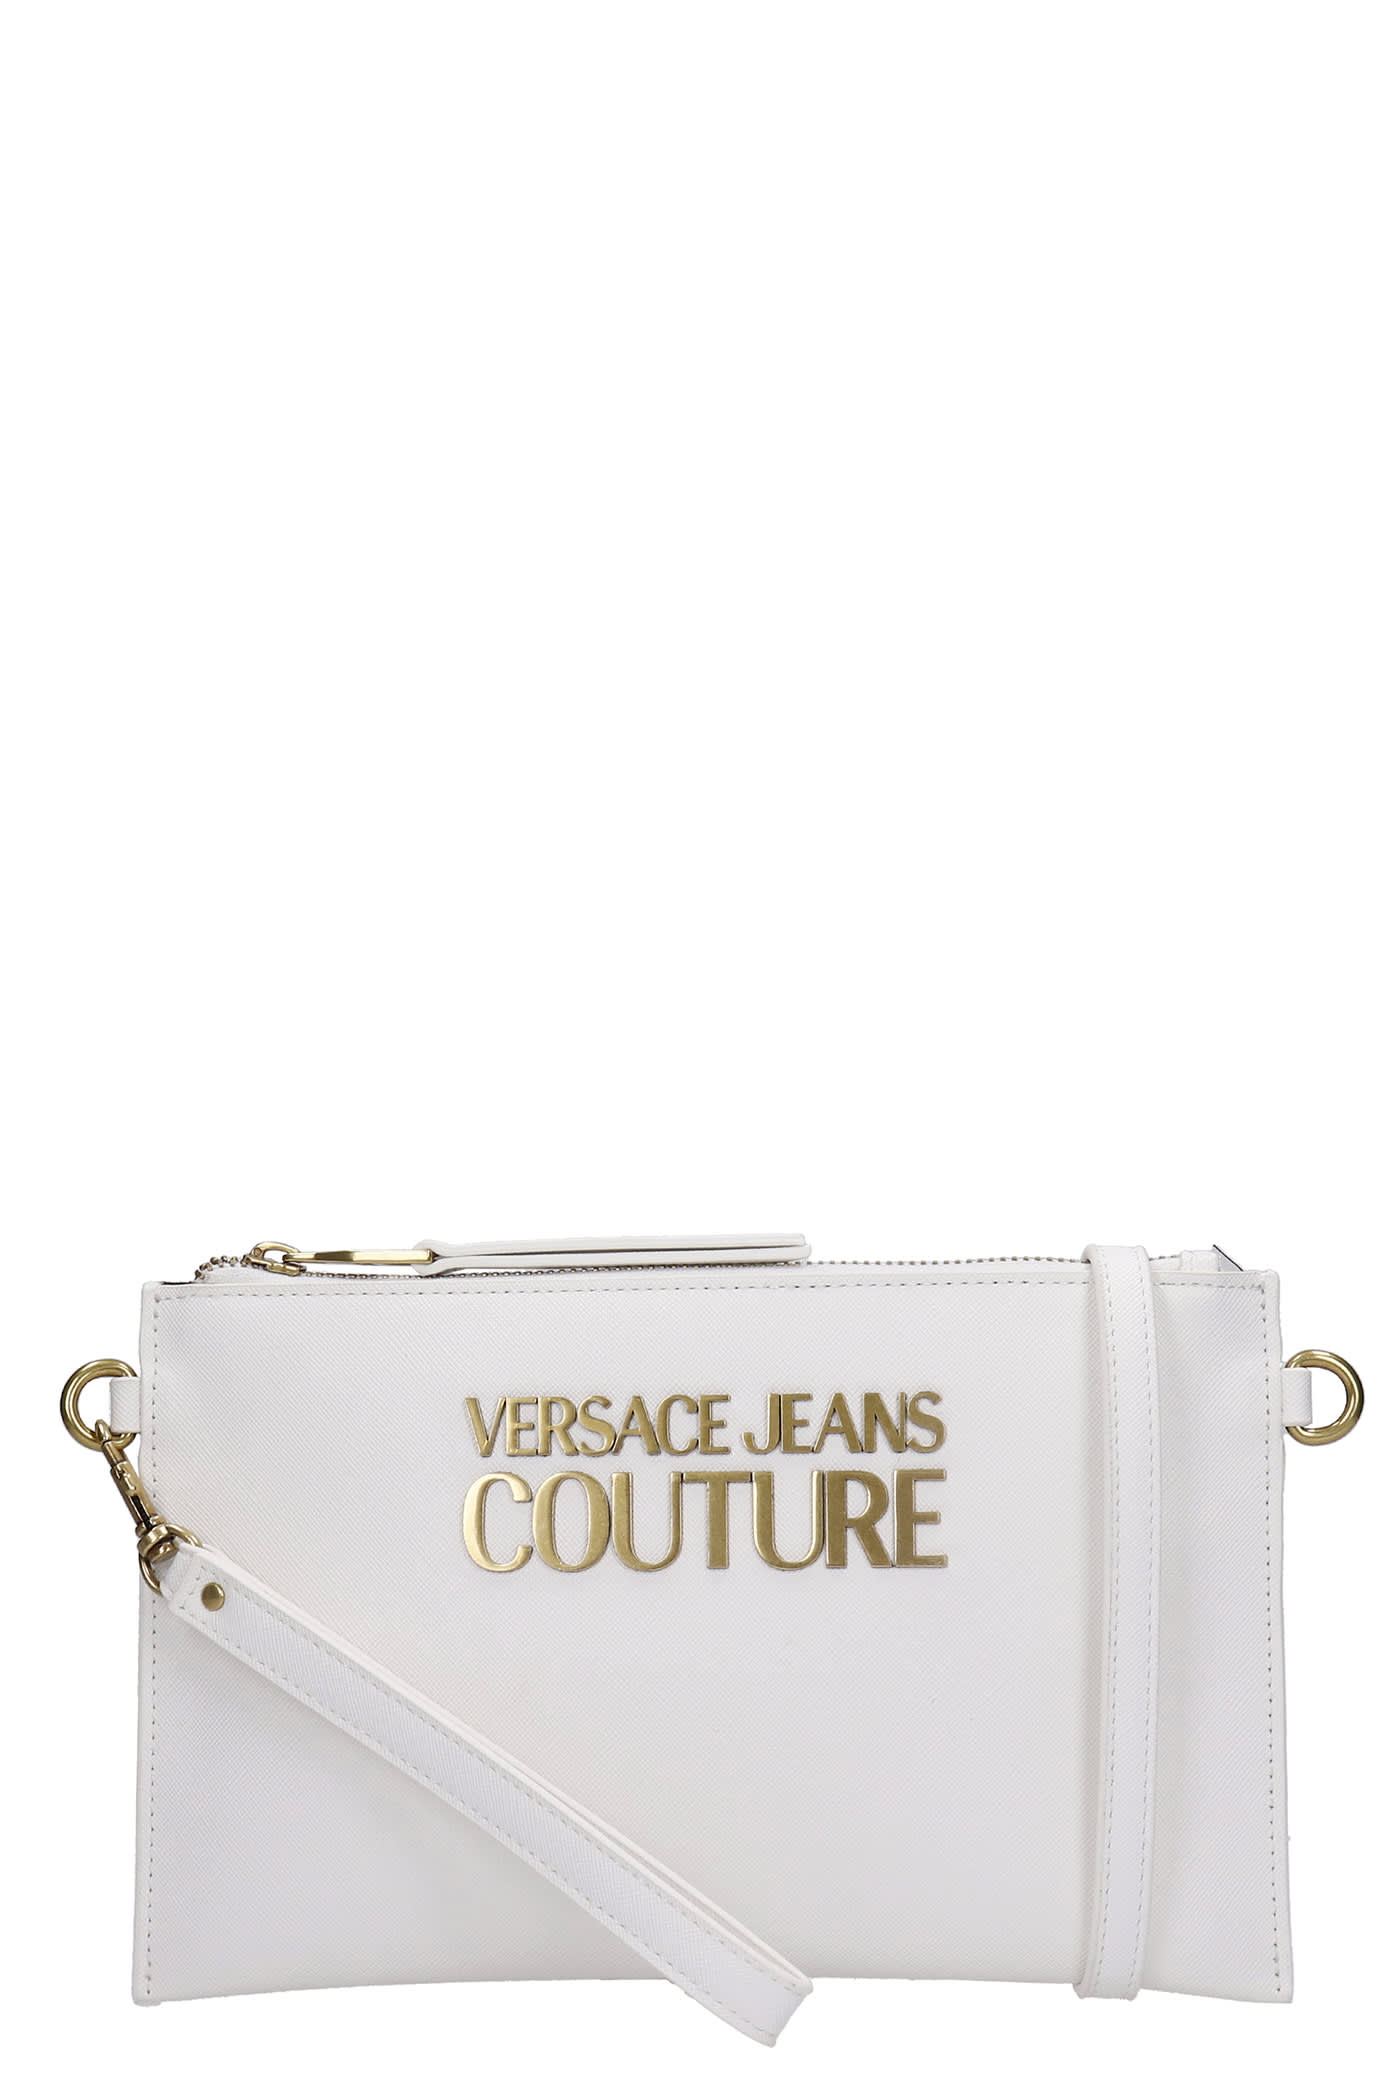 Versace Jeans Couture Clutch In White Faux Leather